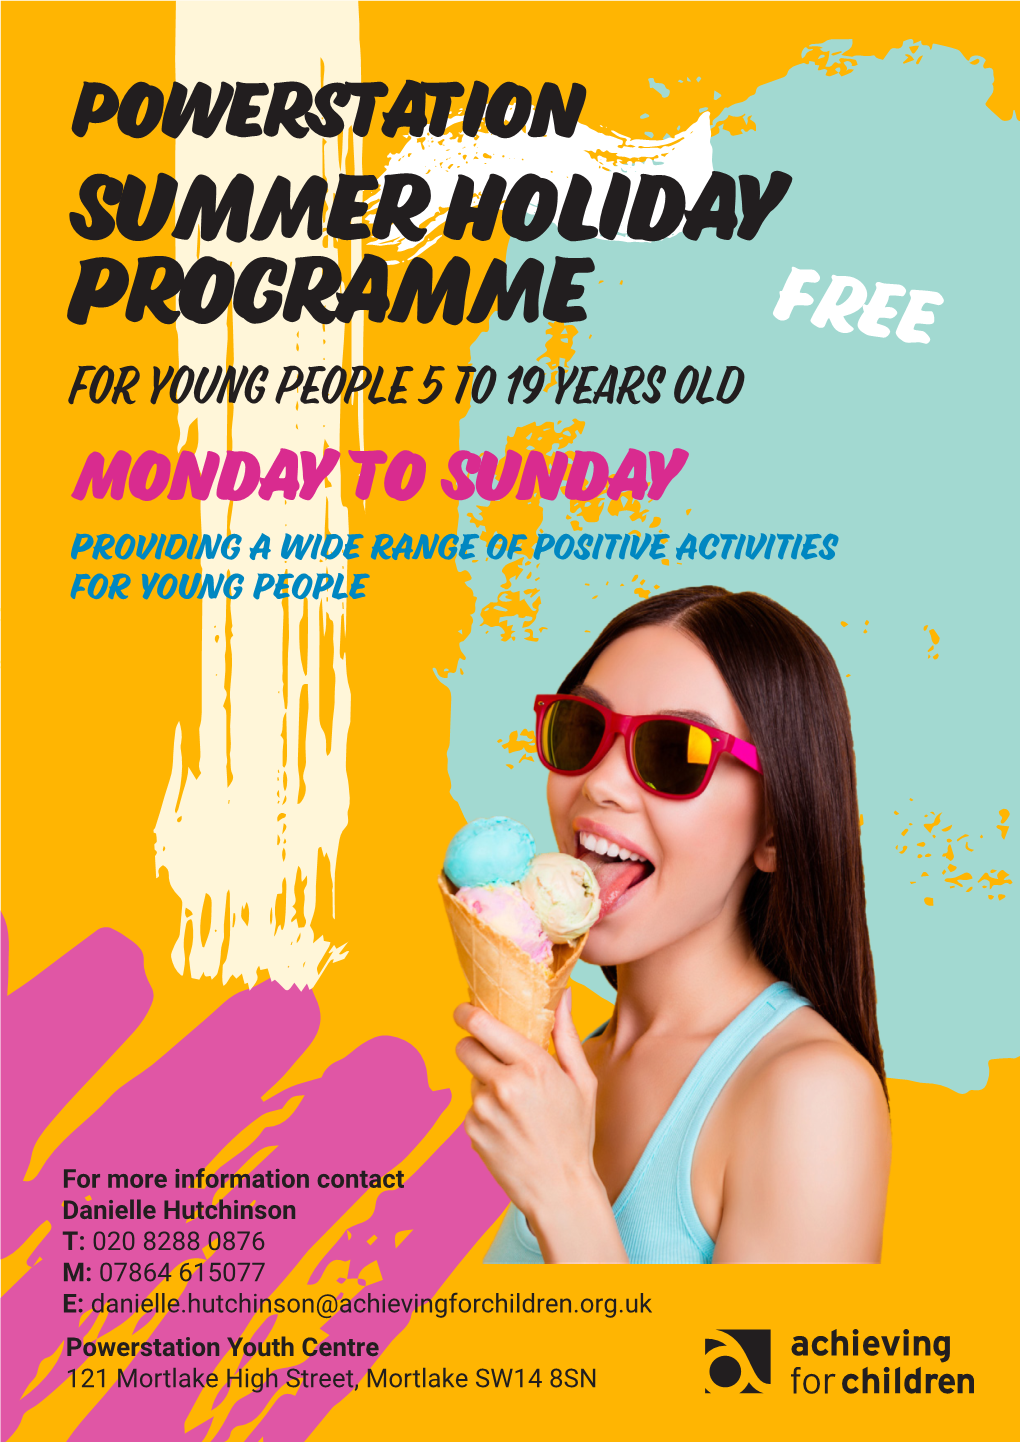 Powerstation Summer Holiday Programme FREE for Young People 5 to 19 Years Old Monday to Sunday Providing a Wide Range of Positive Activities for Young People